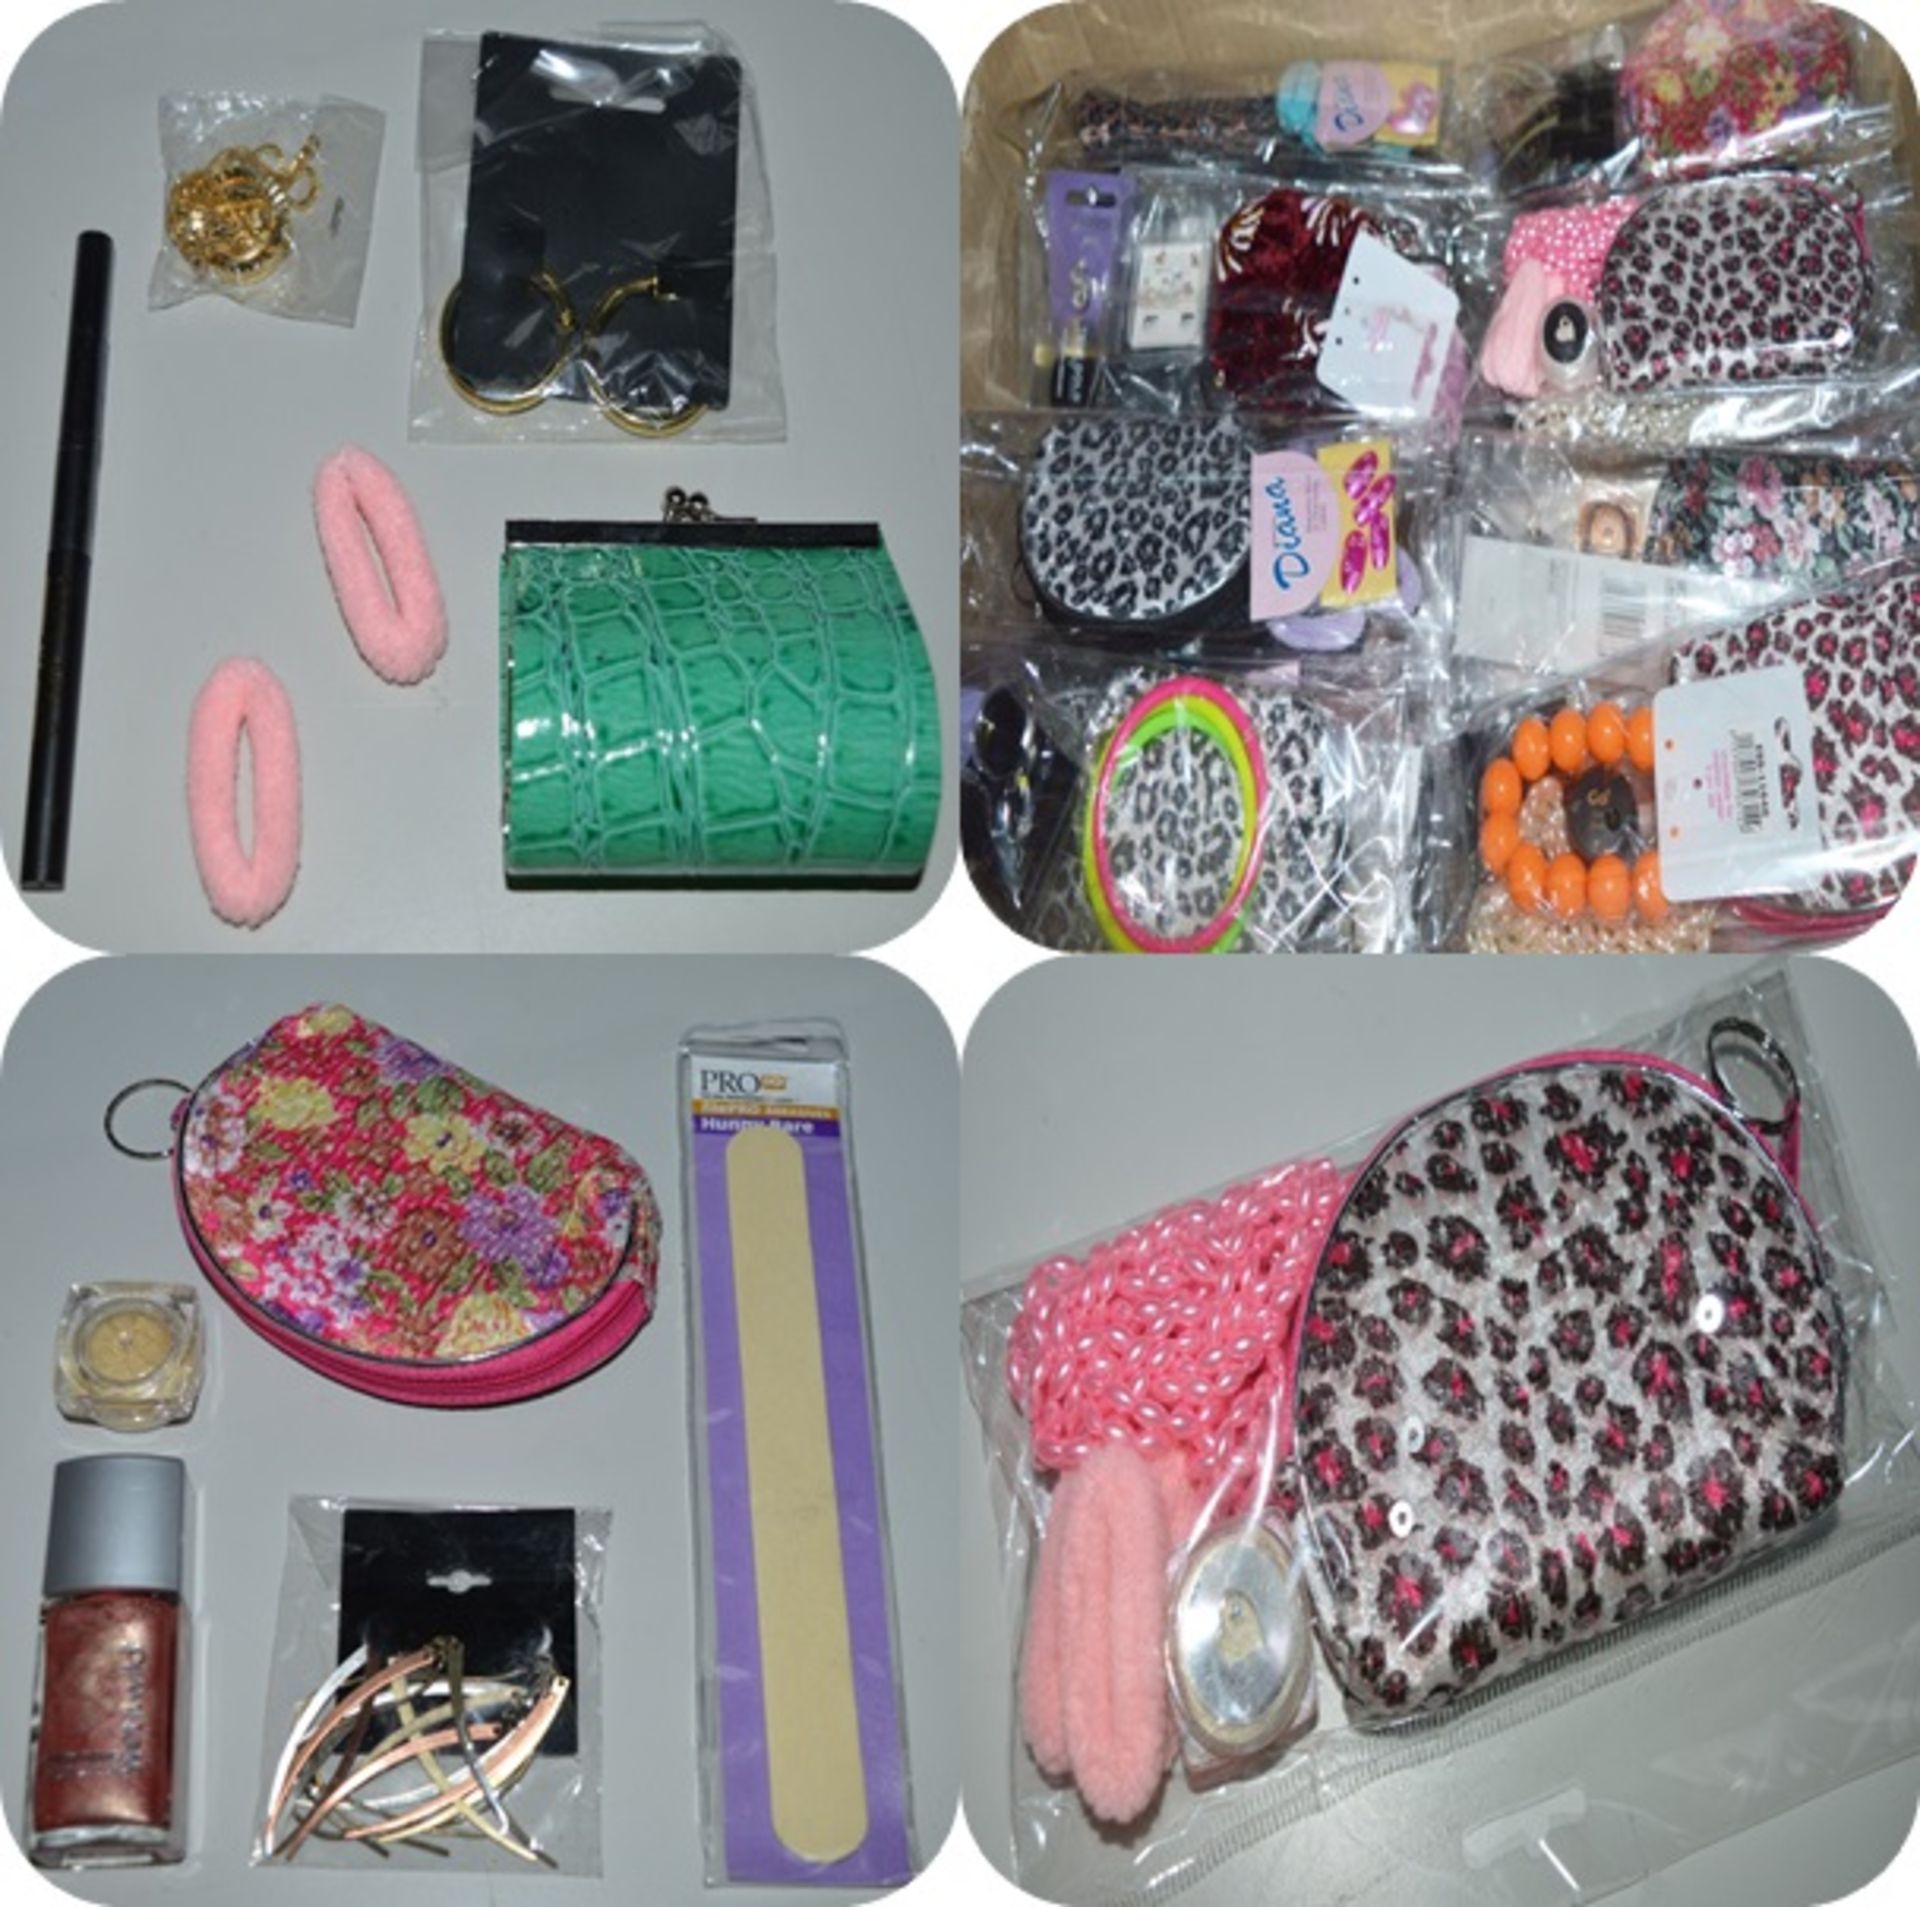 200 x Girls Beauty Gift Sets - Each Set Includes Items Such as a Stylish Purse, Ear Rings, Hair